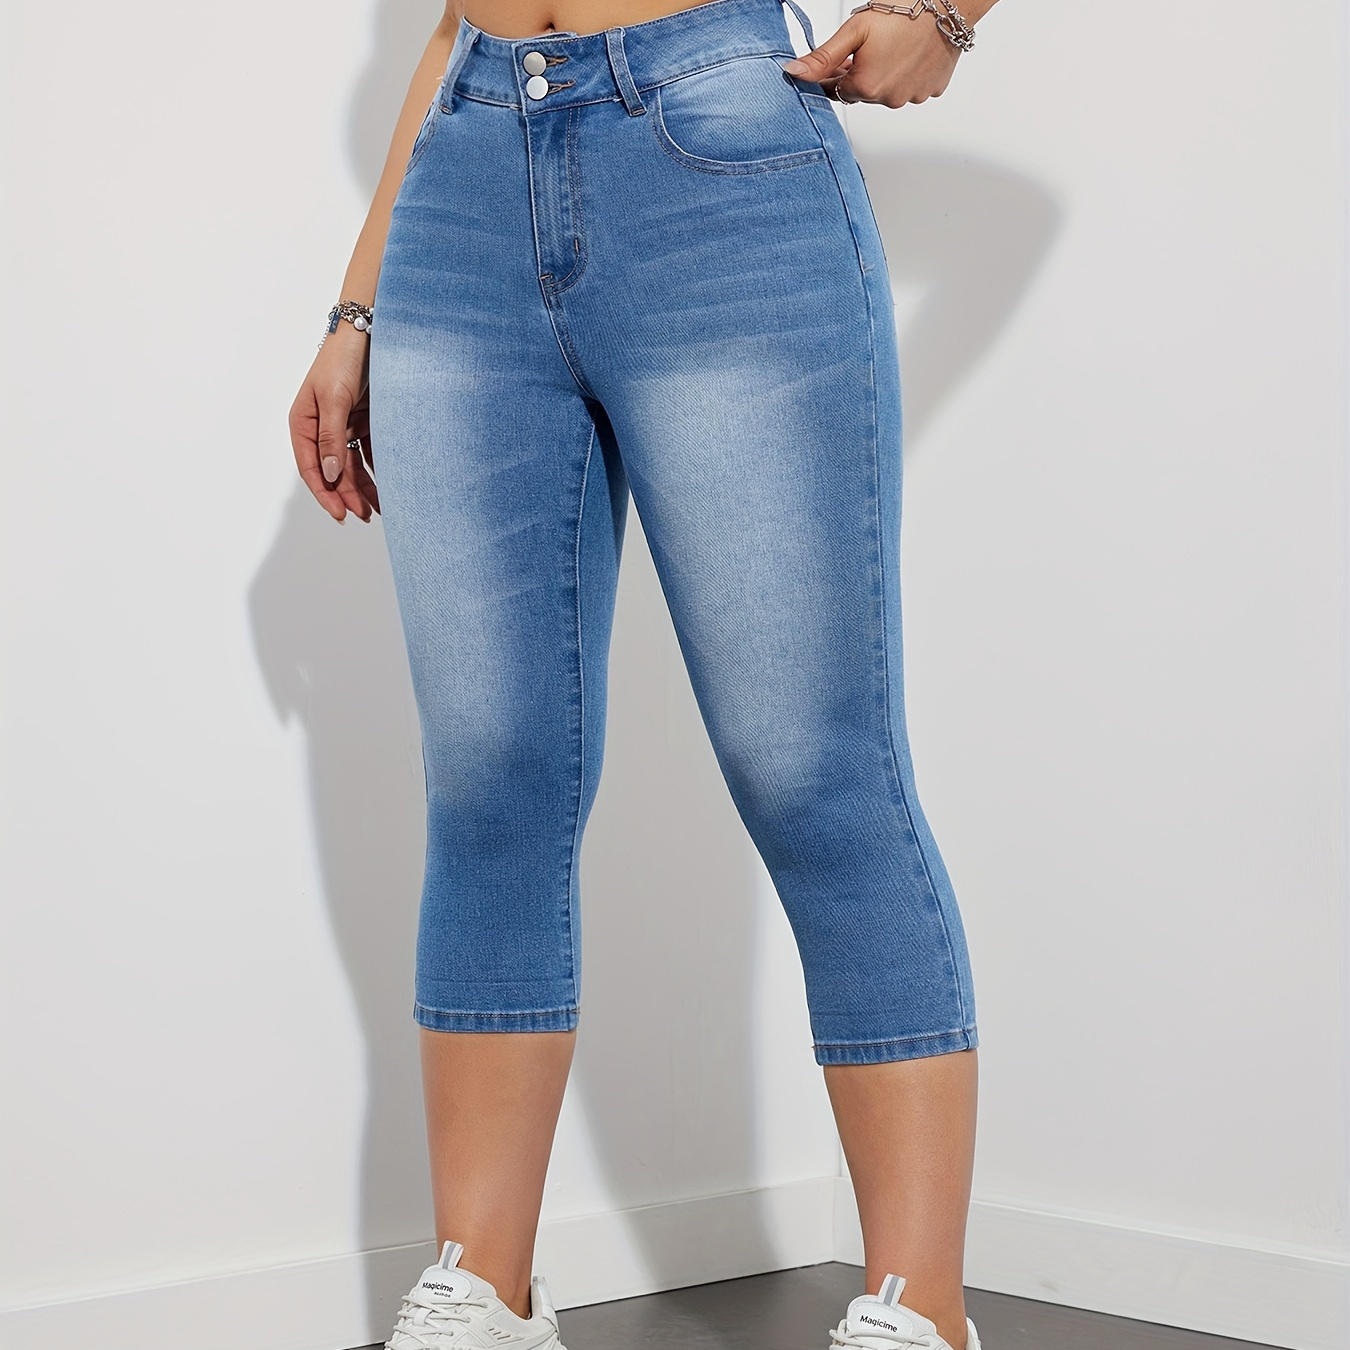 

Women's Stretch Plain Washed Blue Denim Capri Pants, Mid-rise, Sexy Style, Comfort Fit Jean Cropped Trousers